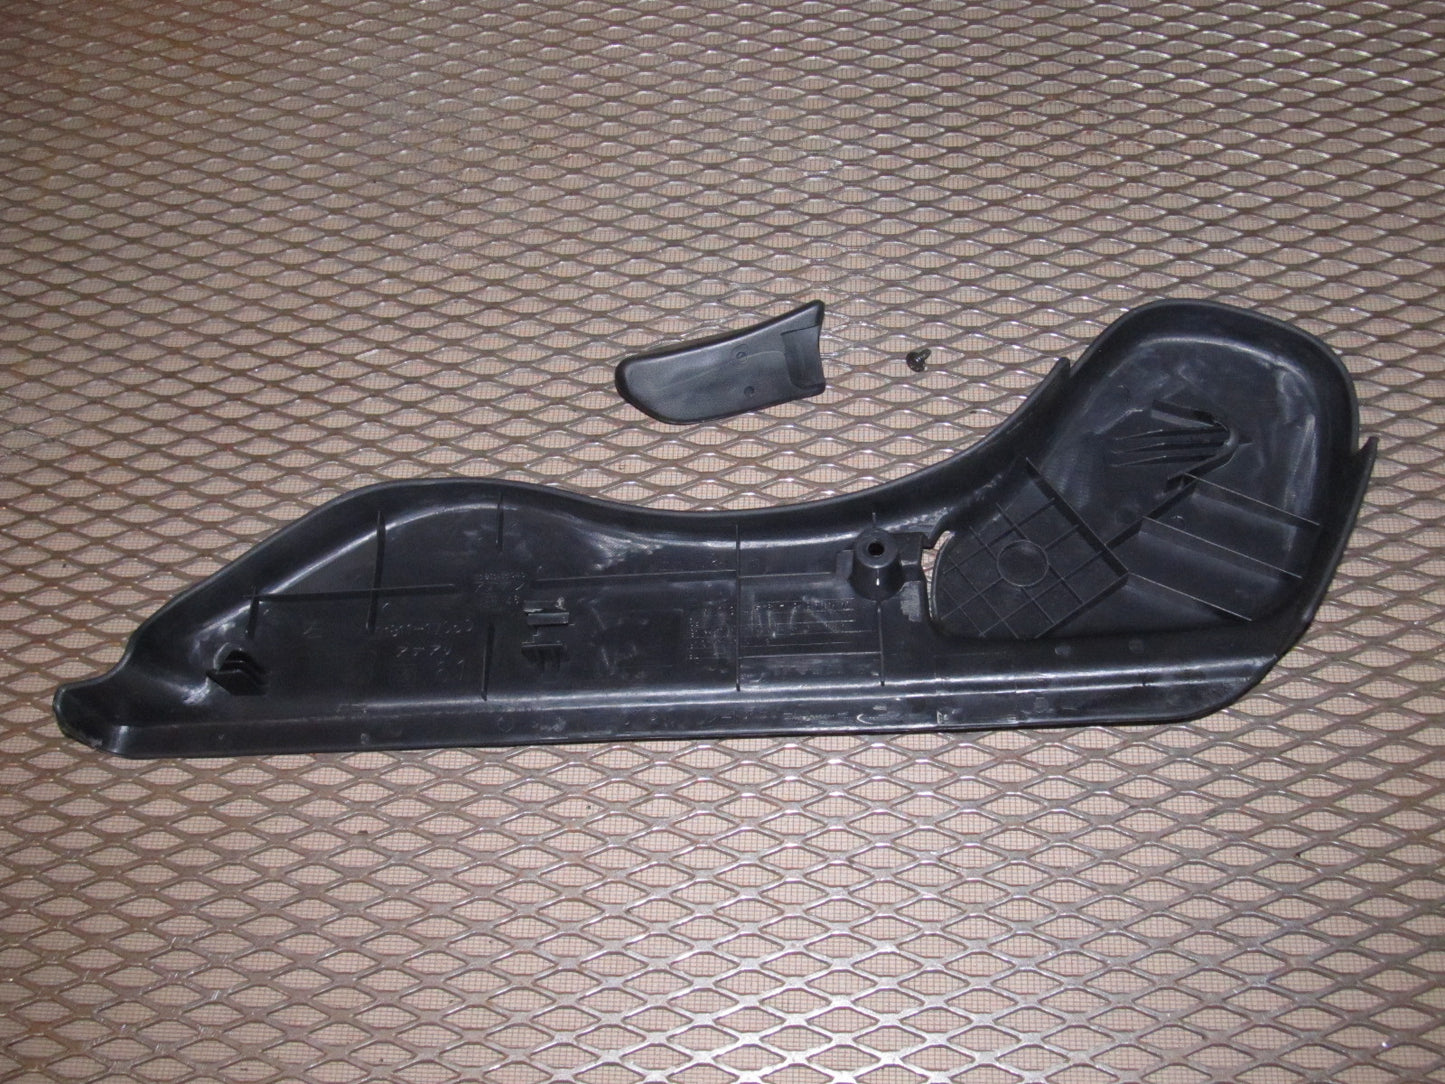 91 92 93 94 95 Toyota MR2 OEM Seat Track Side Cover Panel - Right